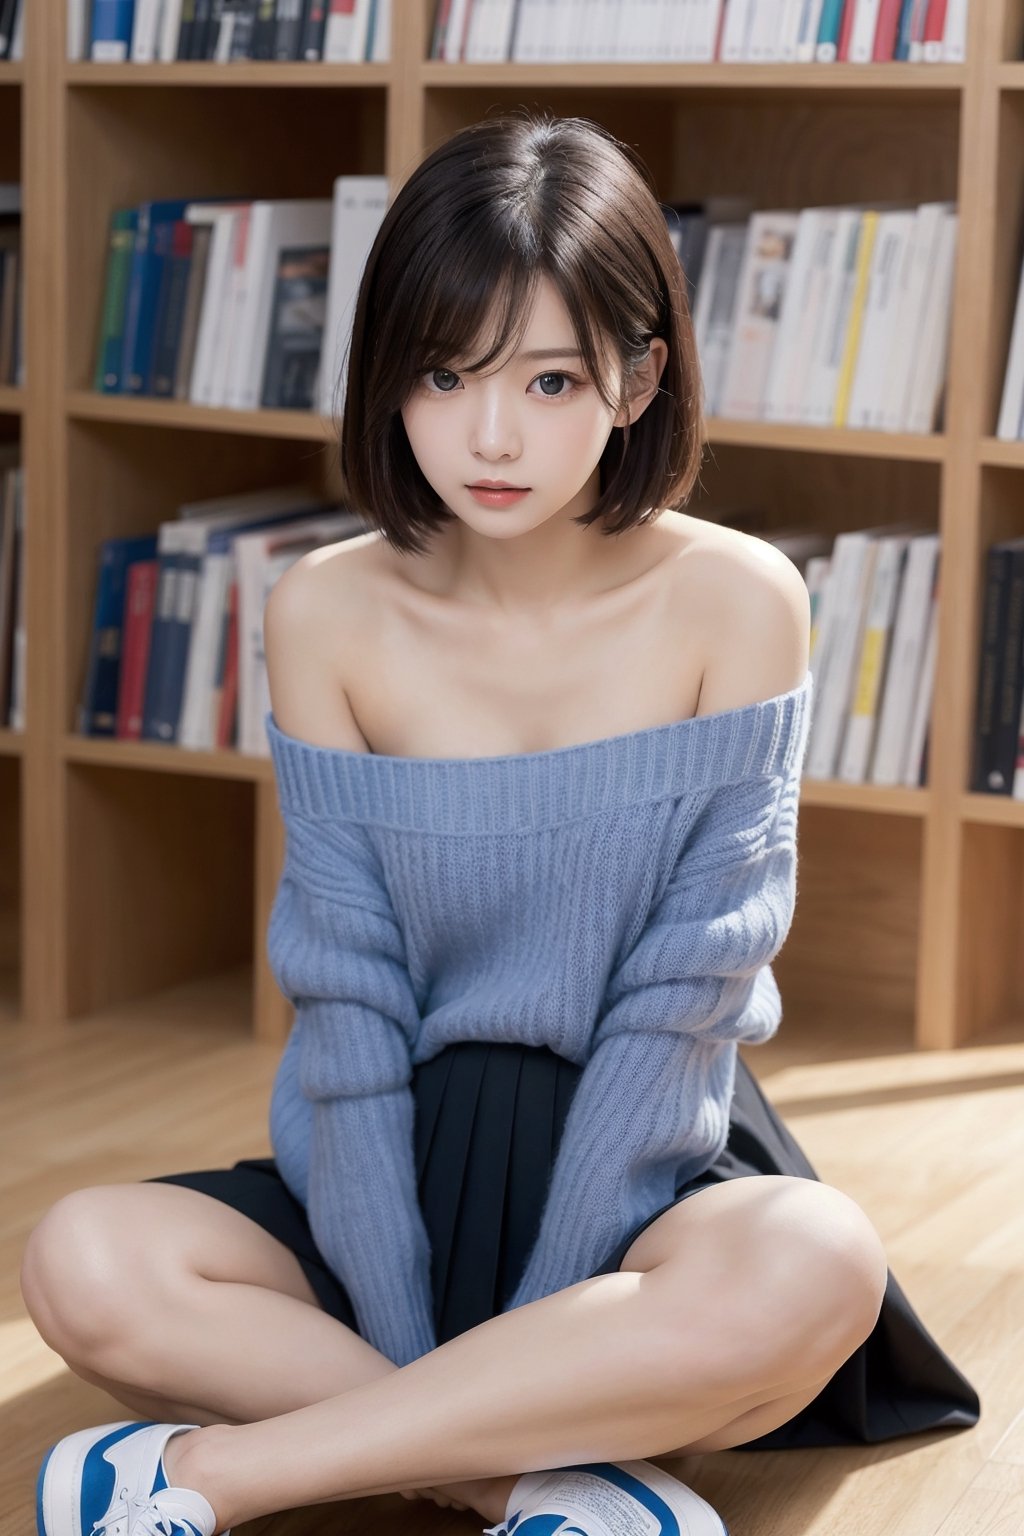 8K Cinema Reality, High resolution, high quality, A A girl sitting on the library floor reading a book, open shoulder Wearing a sweater, Skirt, Korean style, Shy expression, Full-body shot, small natural finger, disheveled short hair style, blue_eyes